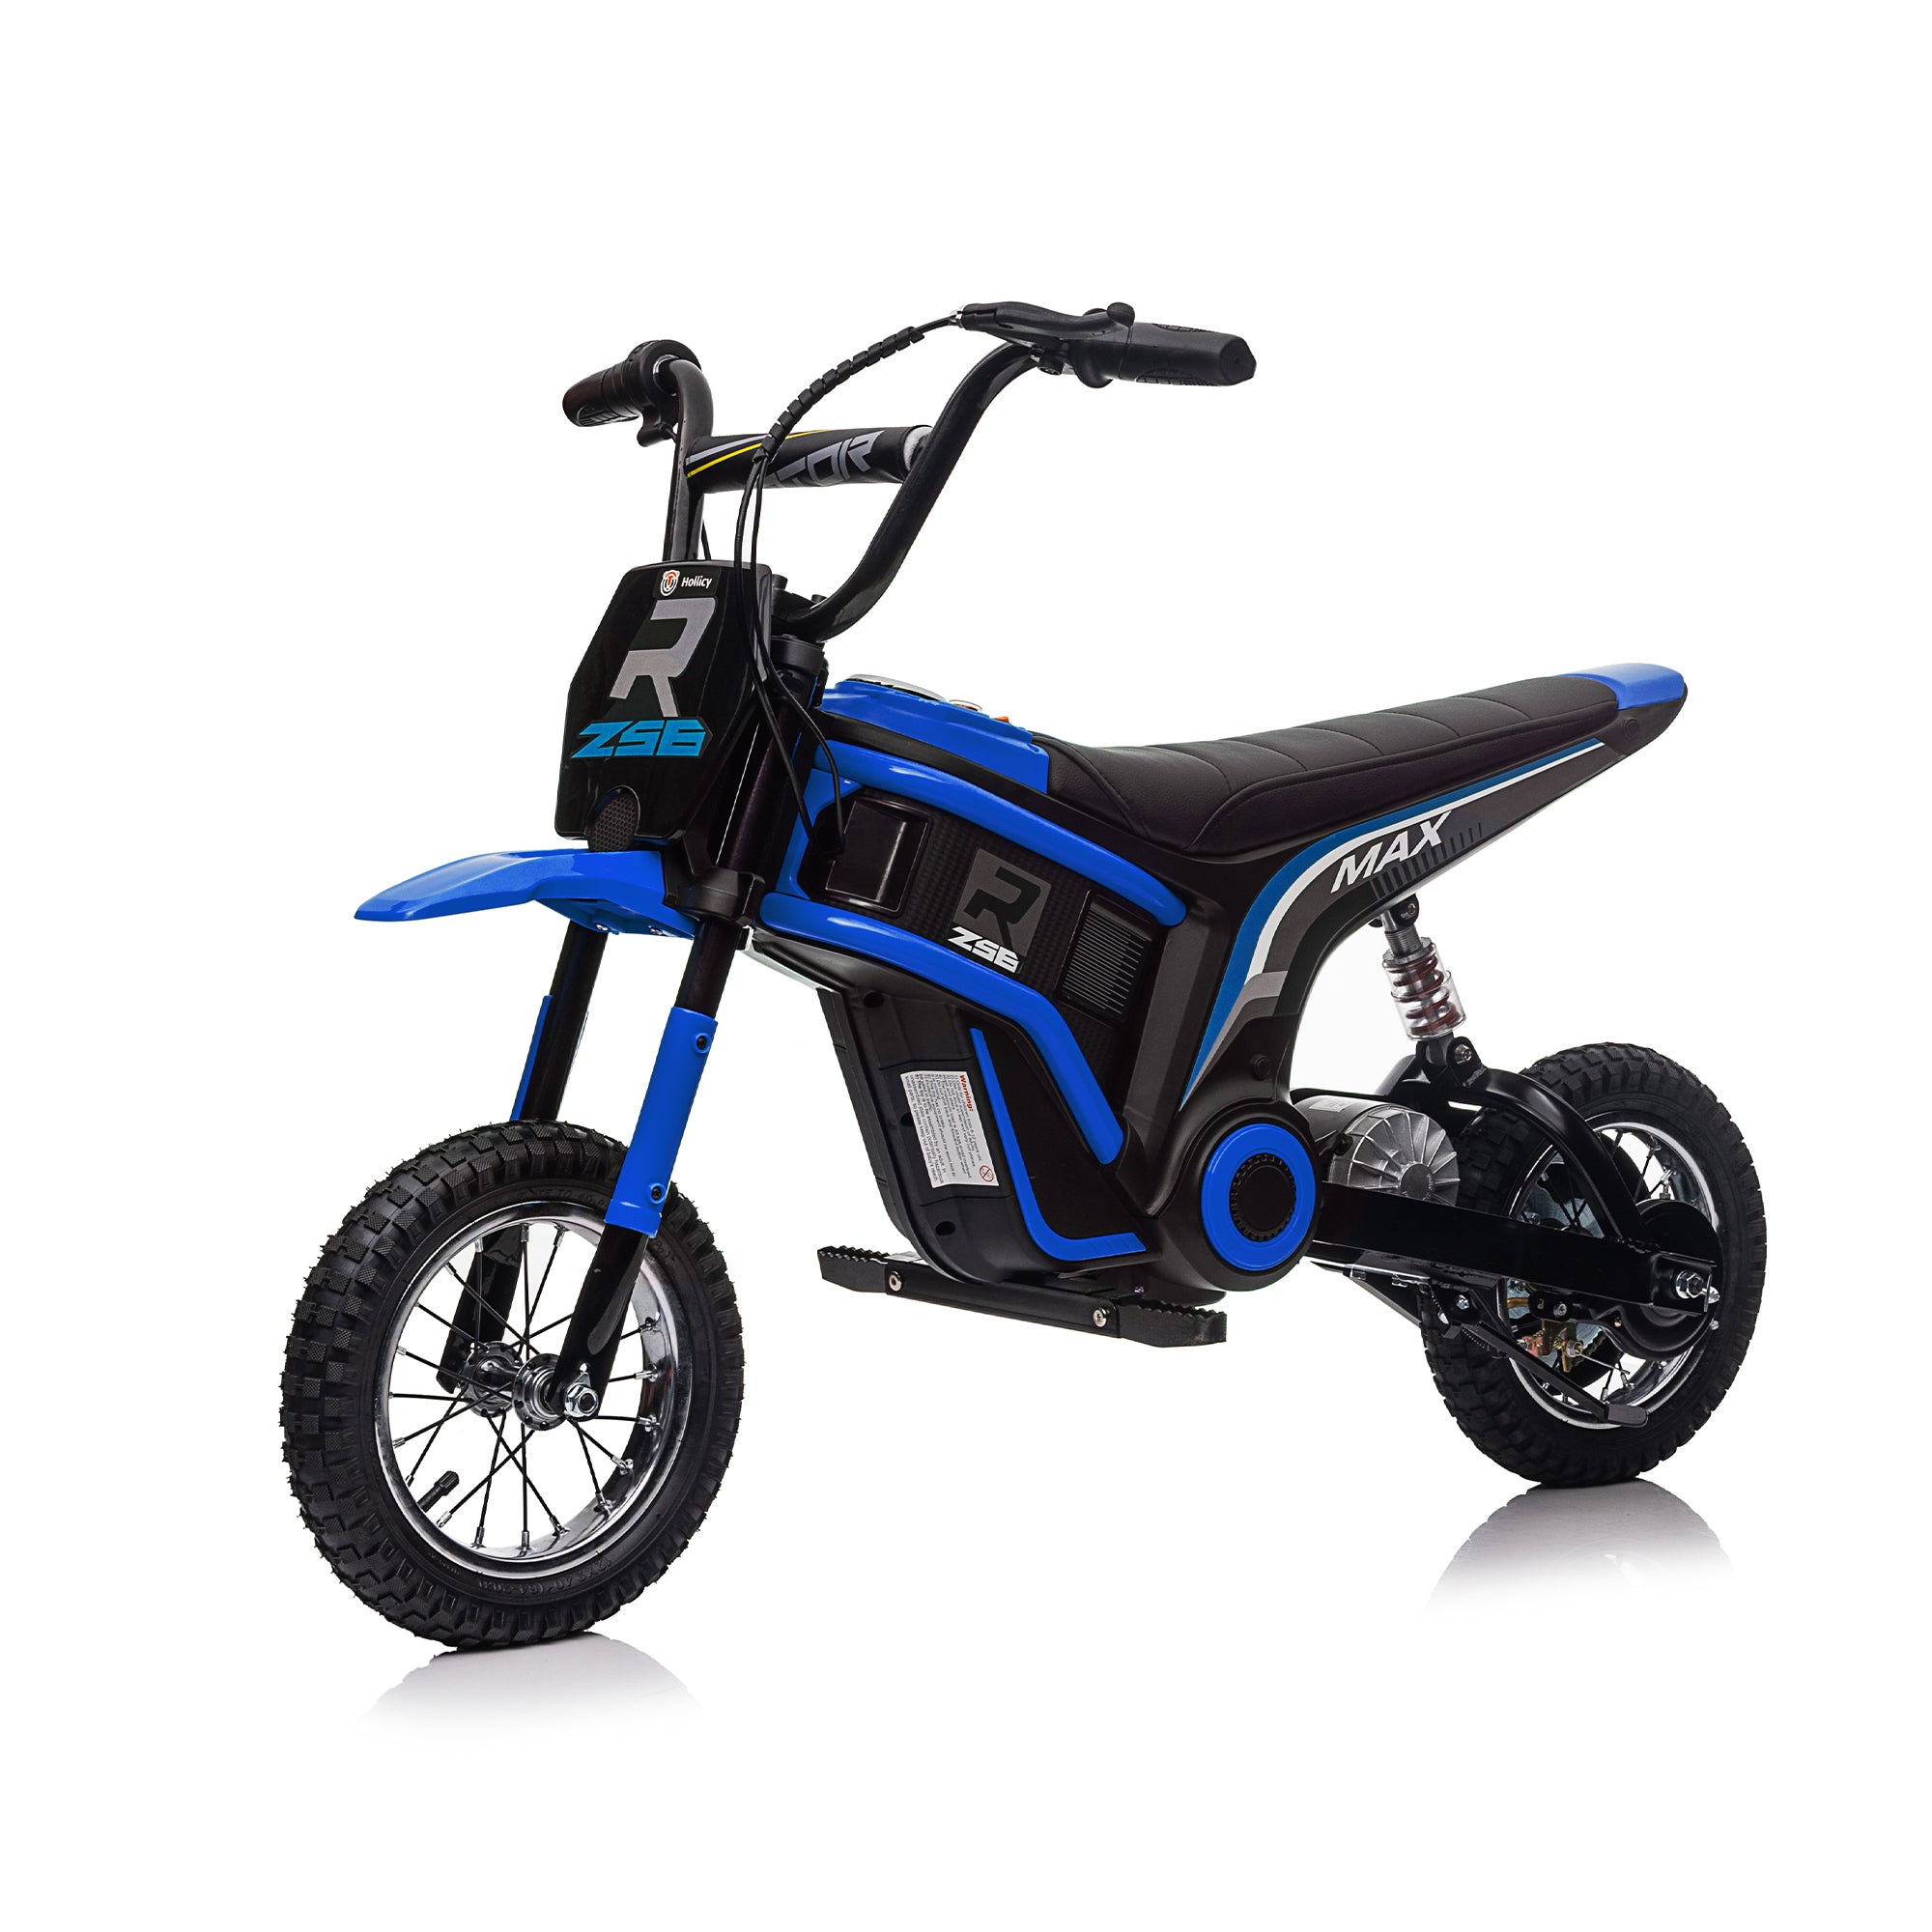 🆓🚛 24V14Ah Kids Ride On 24V Electric Toy Motocross Motorcycle Dirt Bike-XXL Large, Speeds Up To 14.29MPH, Dual Suspension, Hand-Operated Dual Brakes, Twist Grip Throttle, Authentic Motocross Bike Geometry, Blue